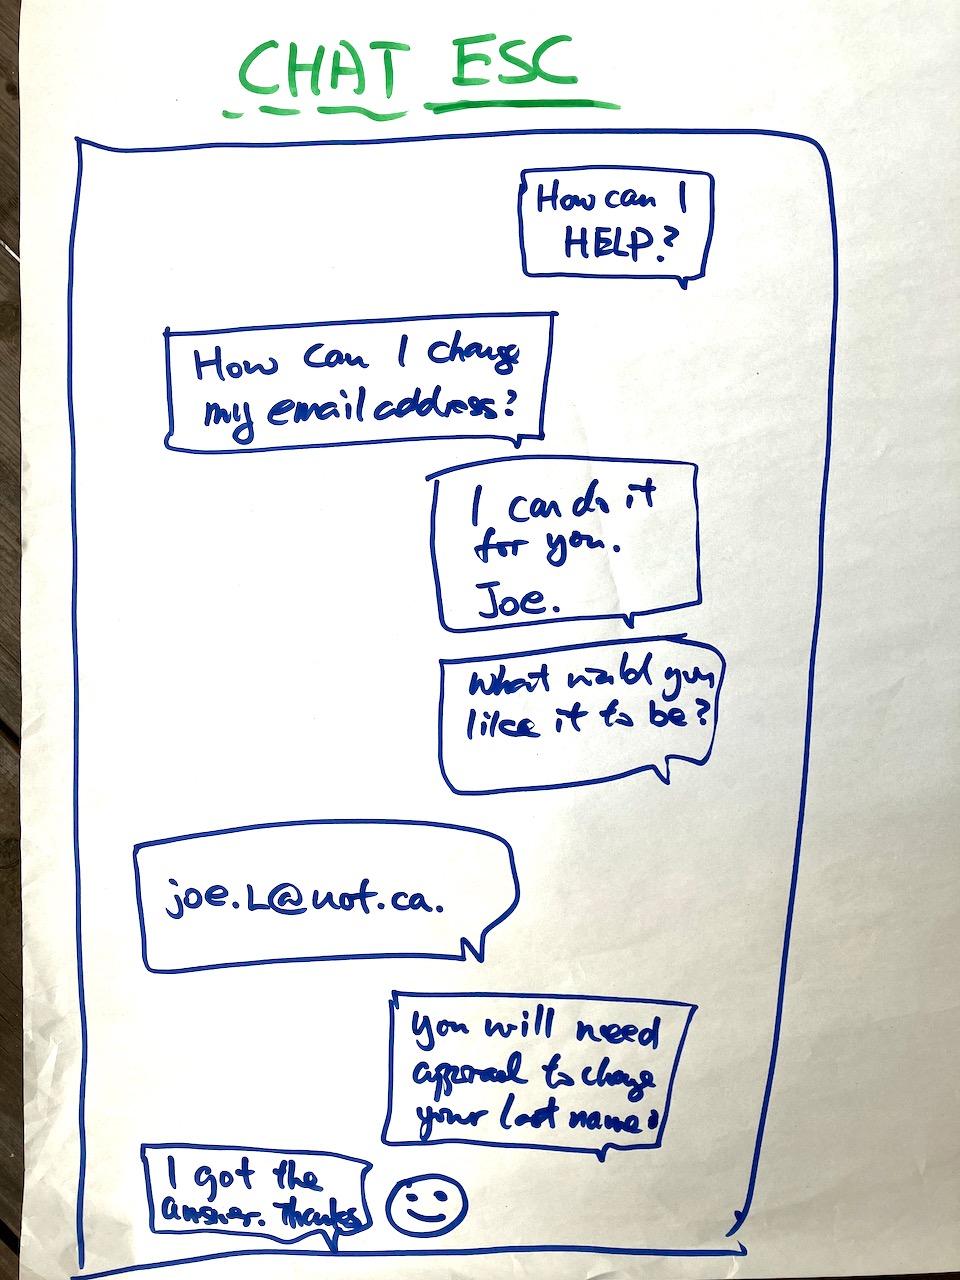 Interface mockup drawn on chart paper with marker. This tool is labeled "Chat ESC"